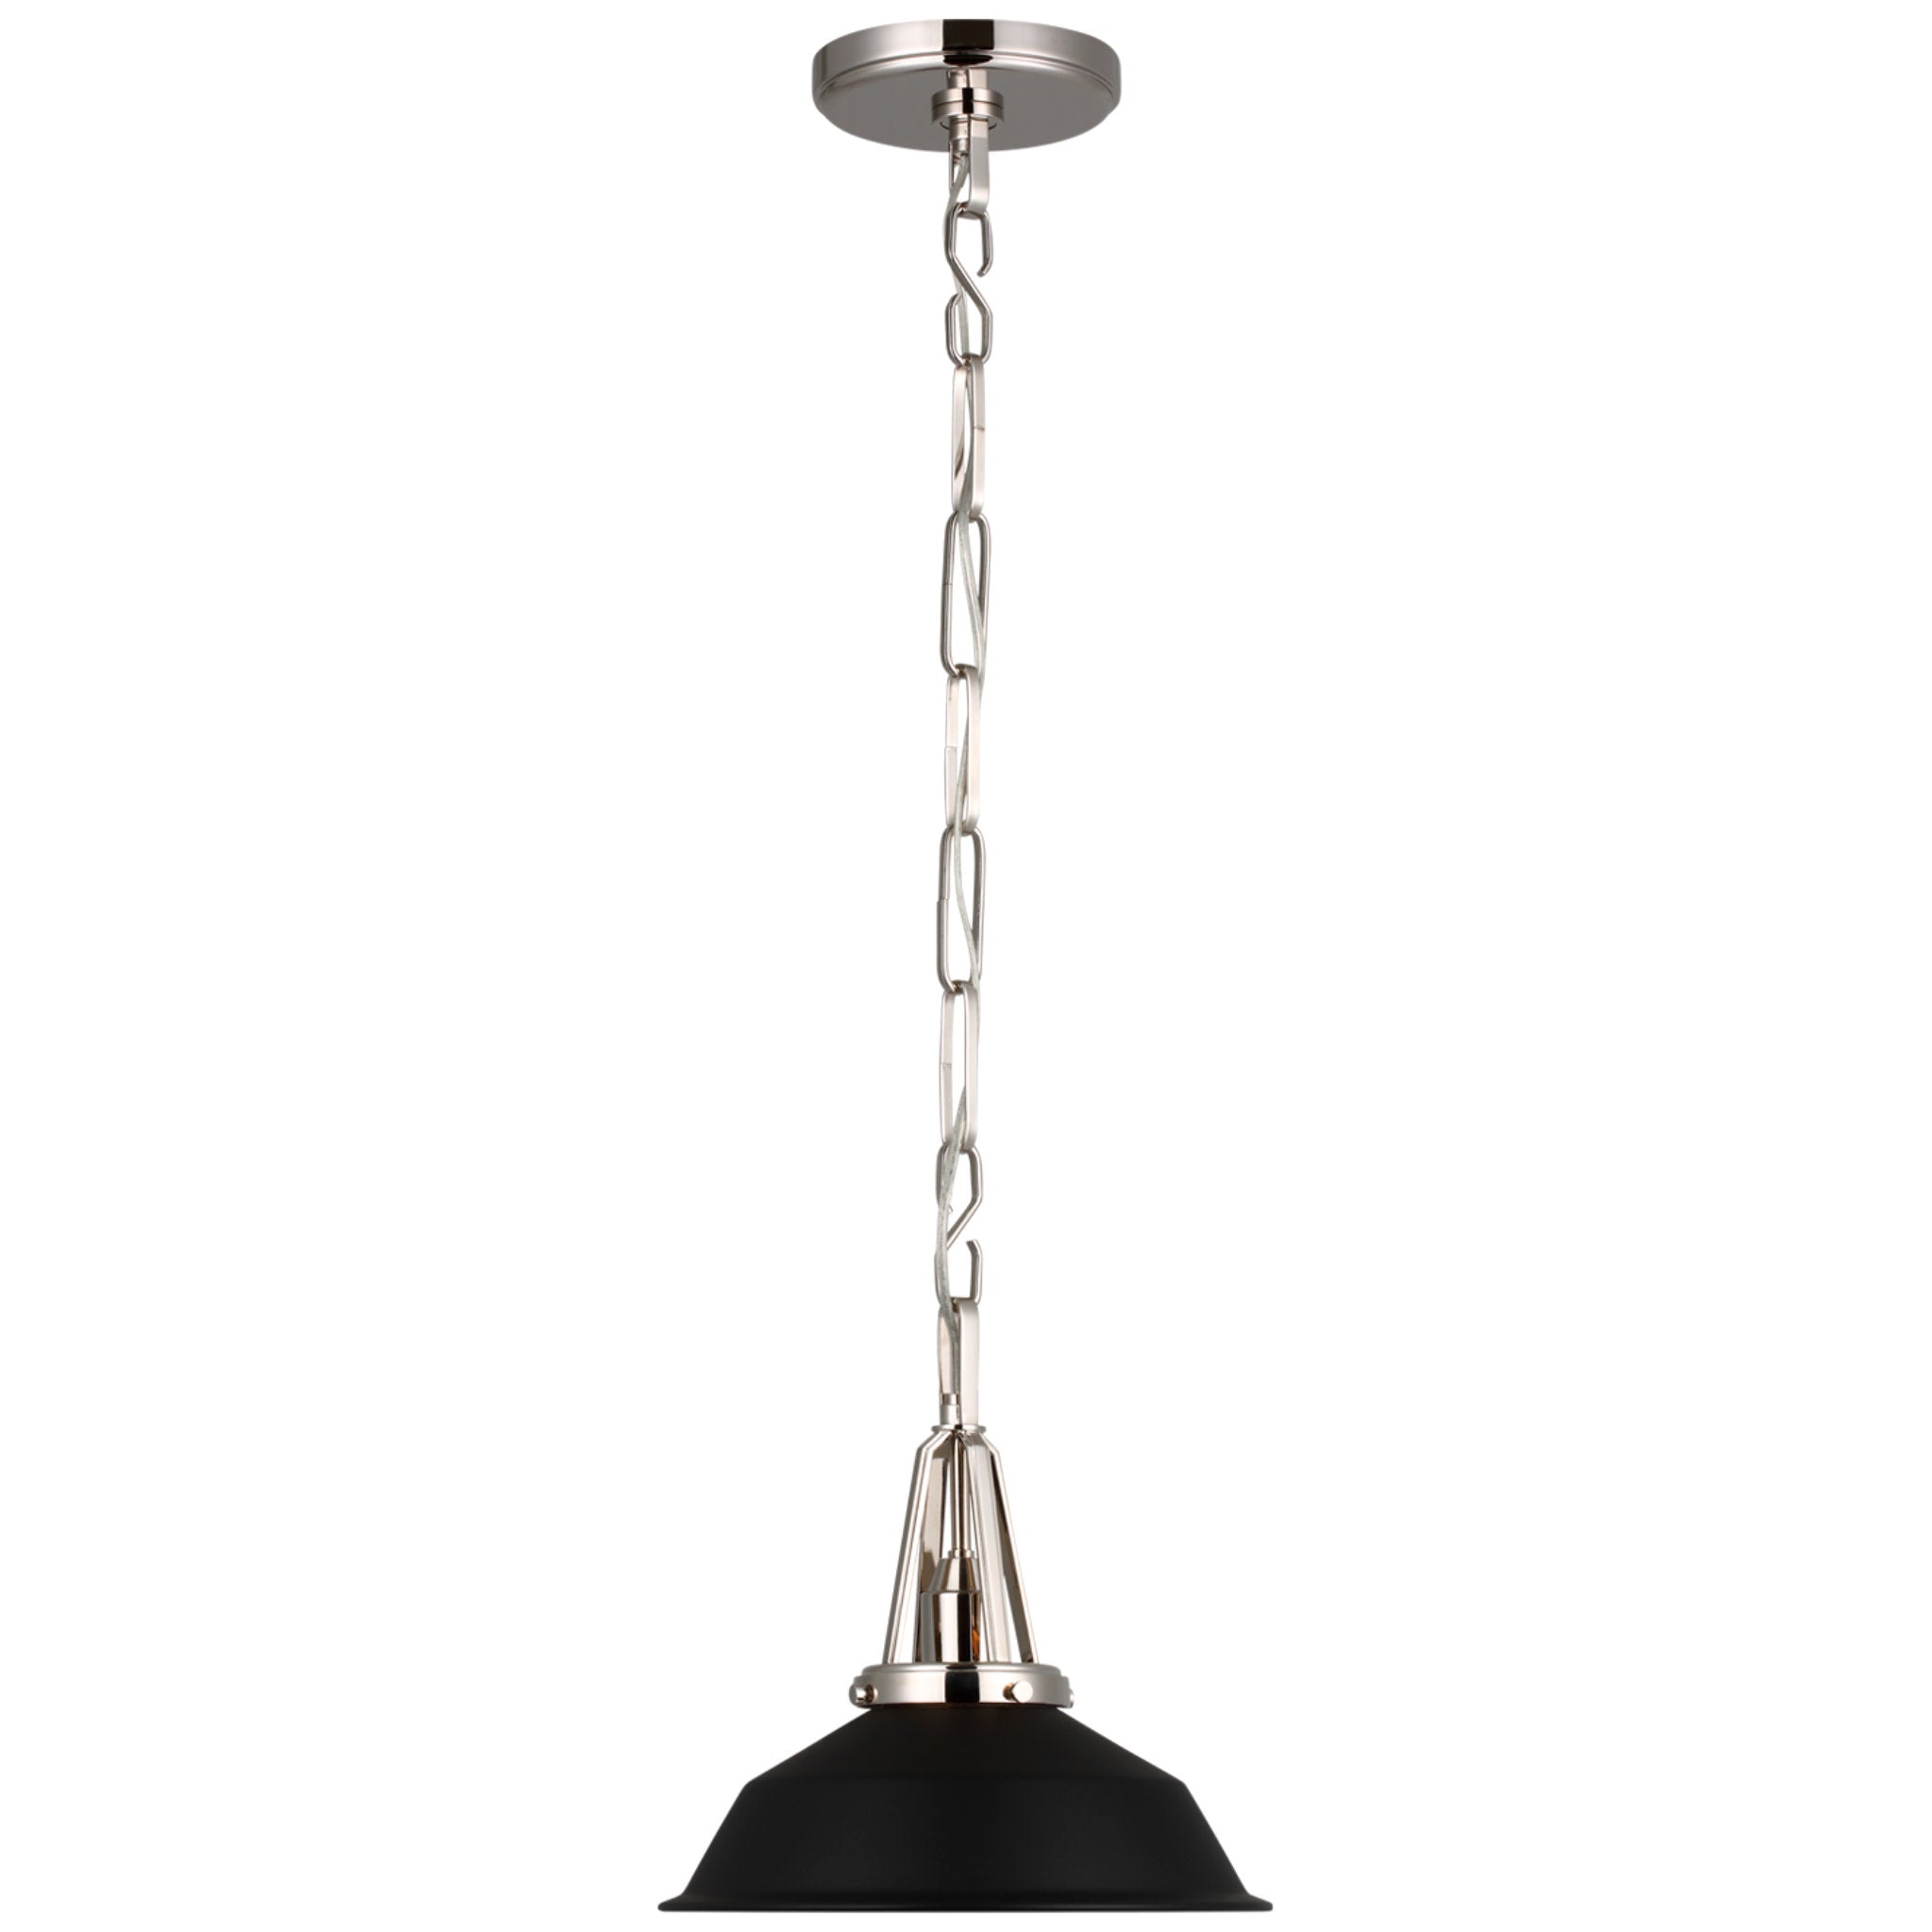 Chapman & Myers Layton 10 Sconce in Polished Nickel with Matte Black